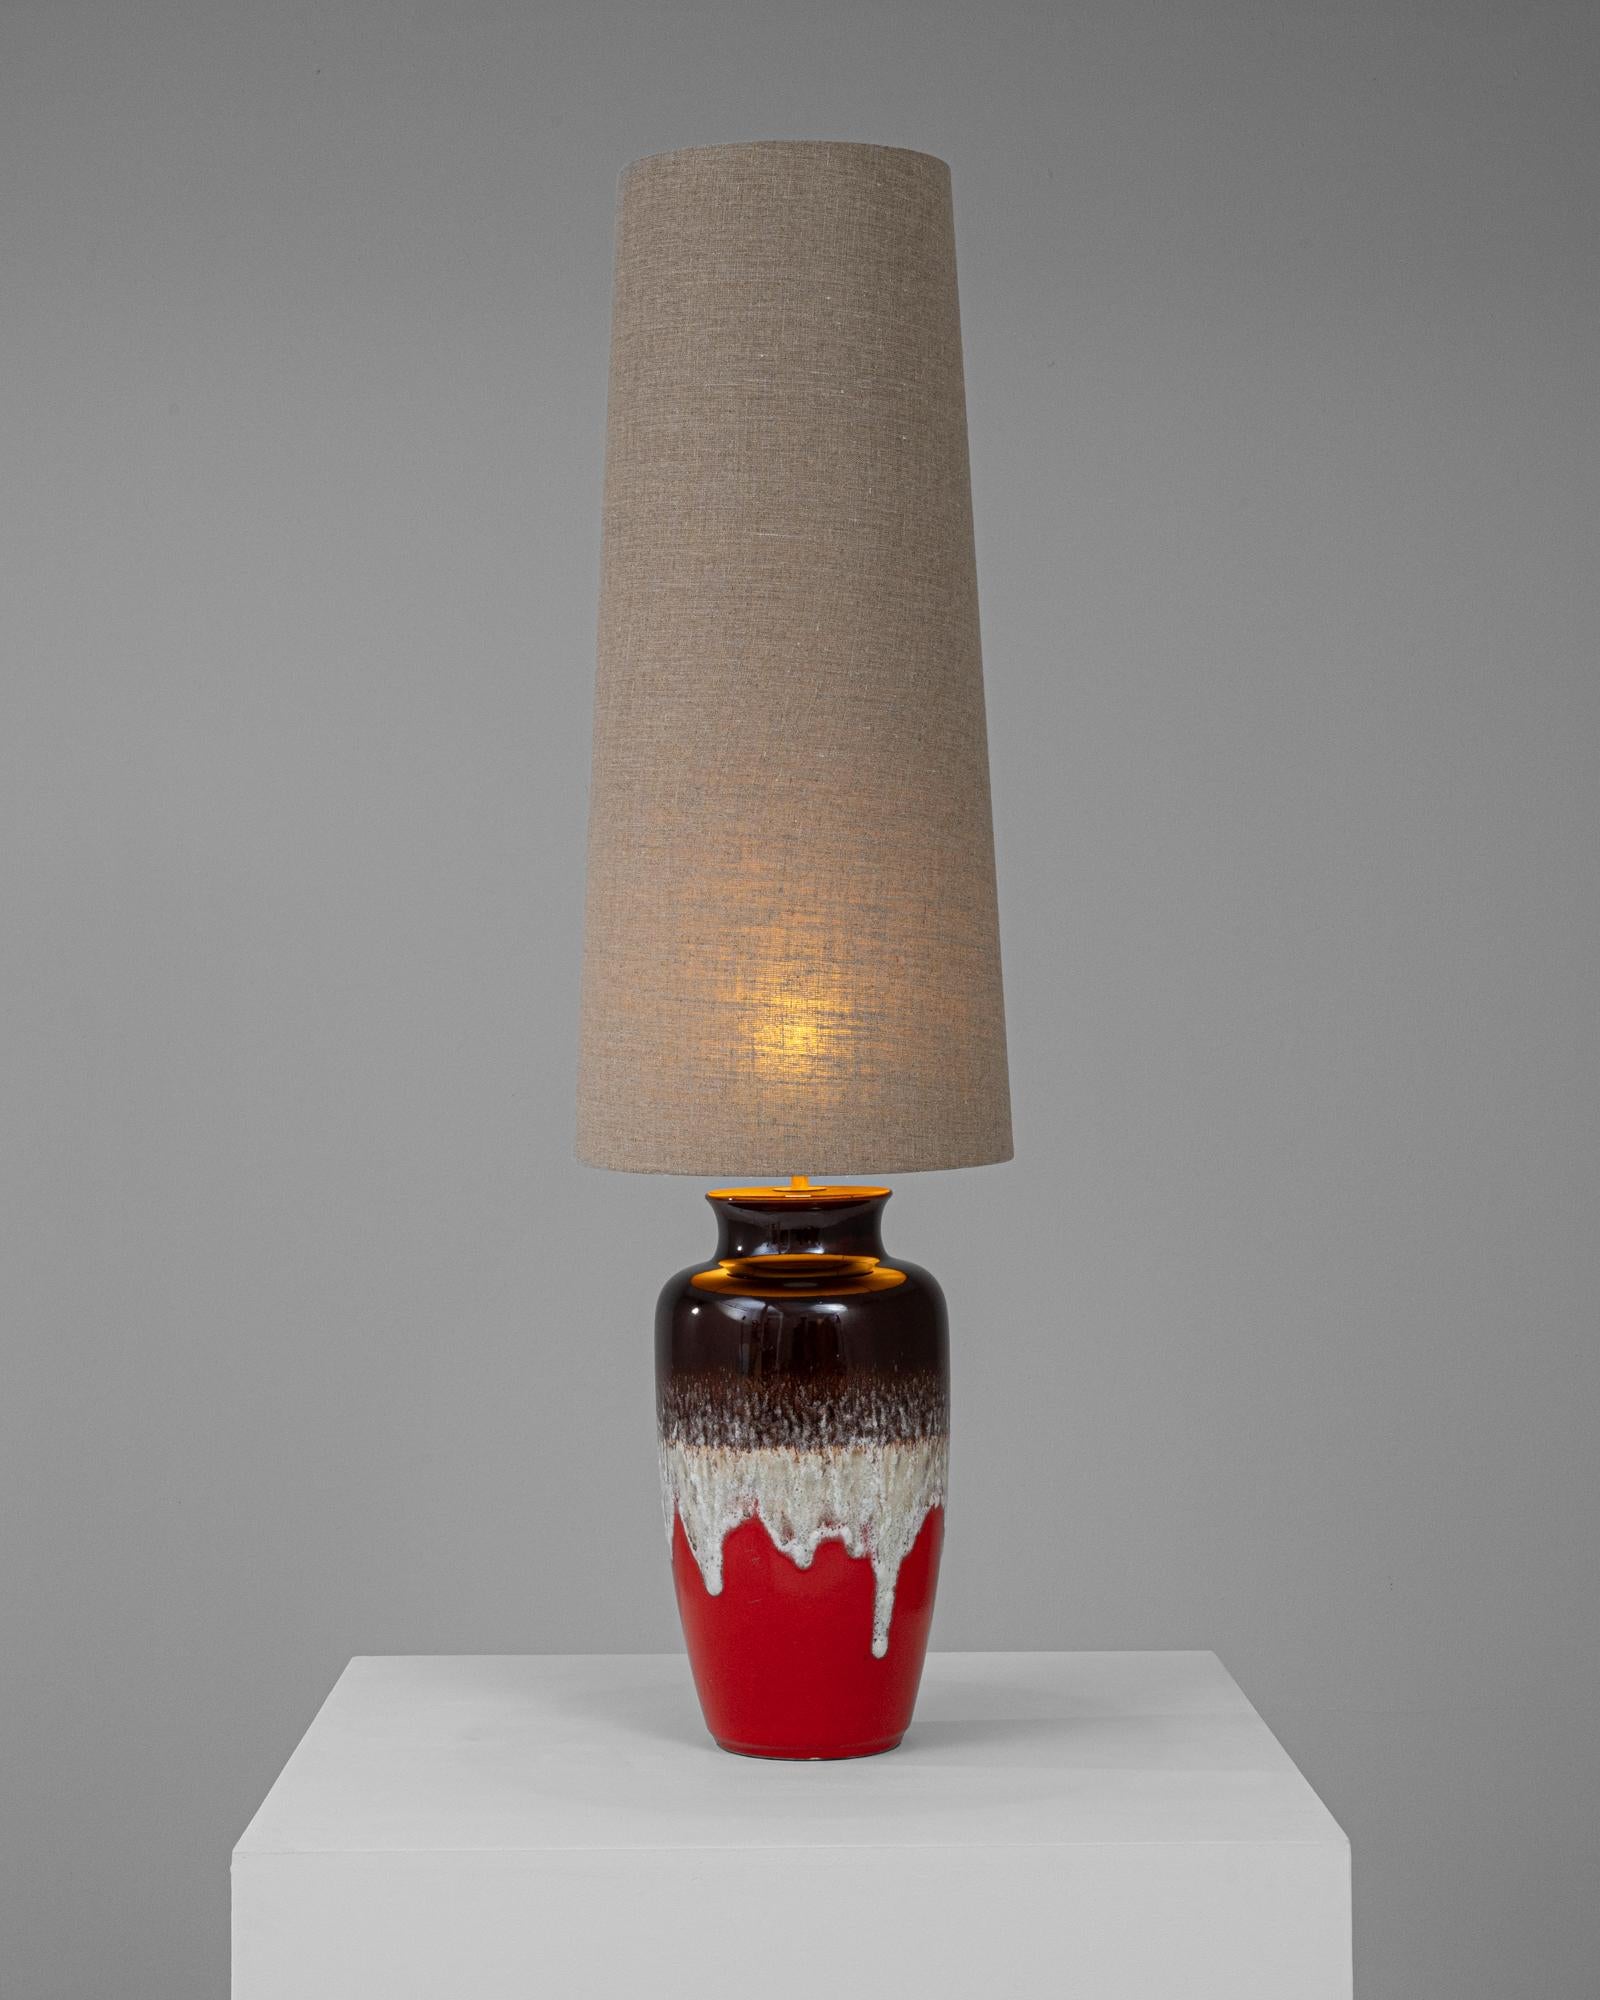 This striking 20th Century German ceramic table lamp brings a bold and artistic flair to any interior. The lamp's base is a masterpiece of ceramic design, featuring a vibrant red color with a dramatic, dripping white and brown glaze that adds an